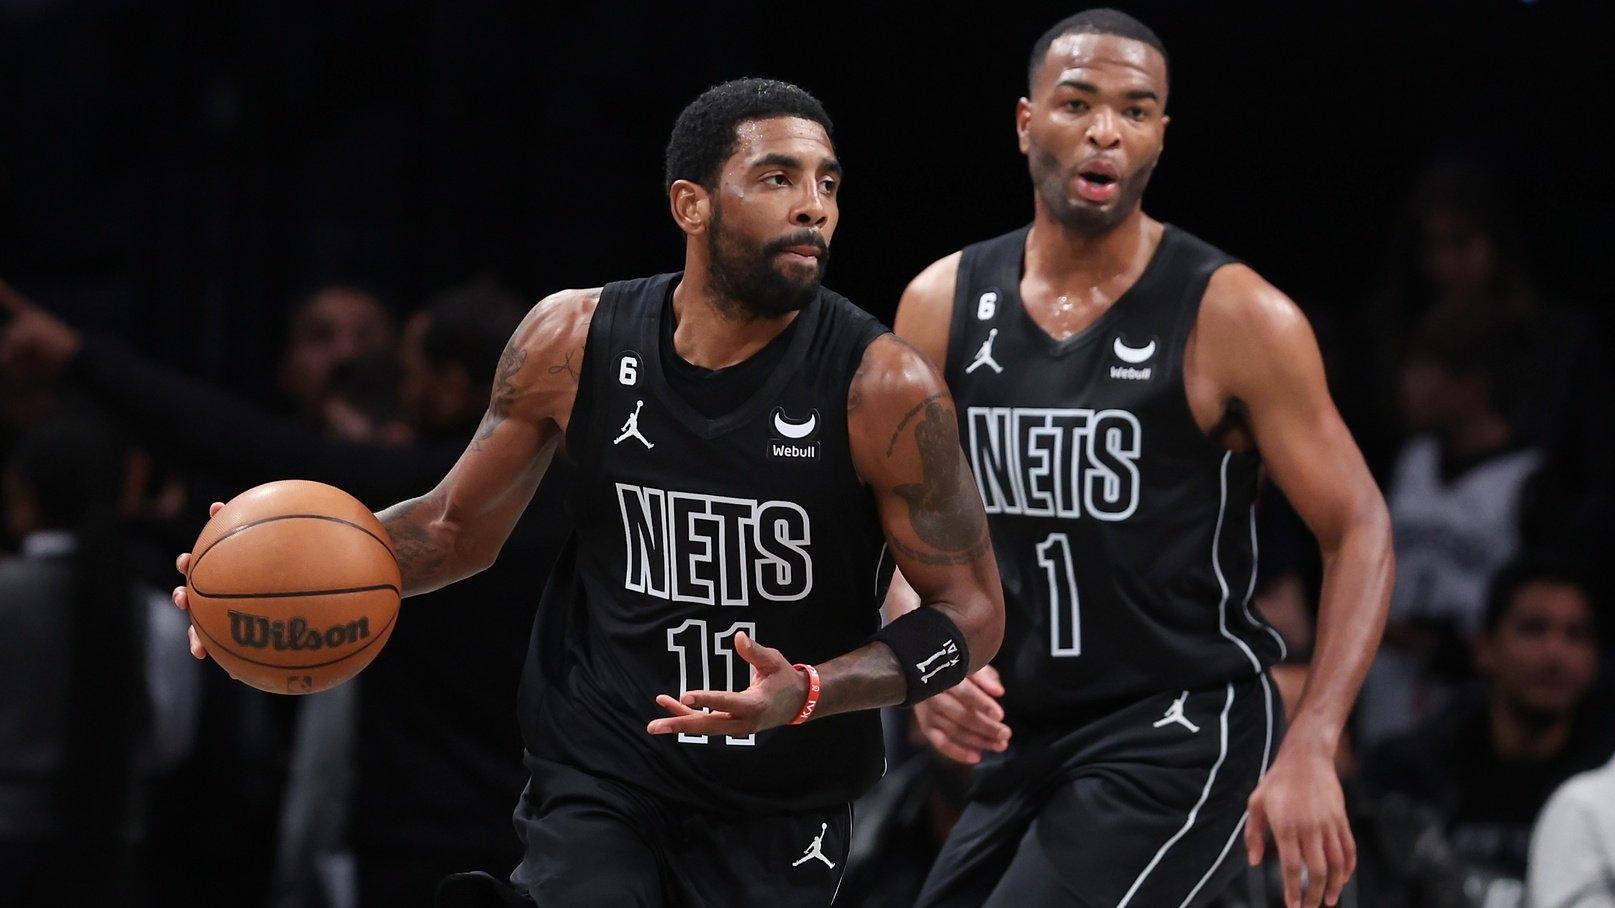 Brooklyn Nets guard Kyrie Irving (11) dribbles in front of forward T.J. Warren (1) during the first half against the Toronto Raptors / Vincent Carchietta-USA TODAY Sports